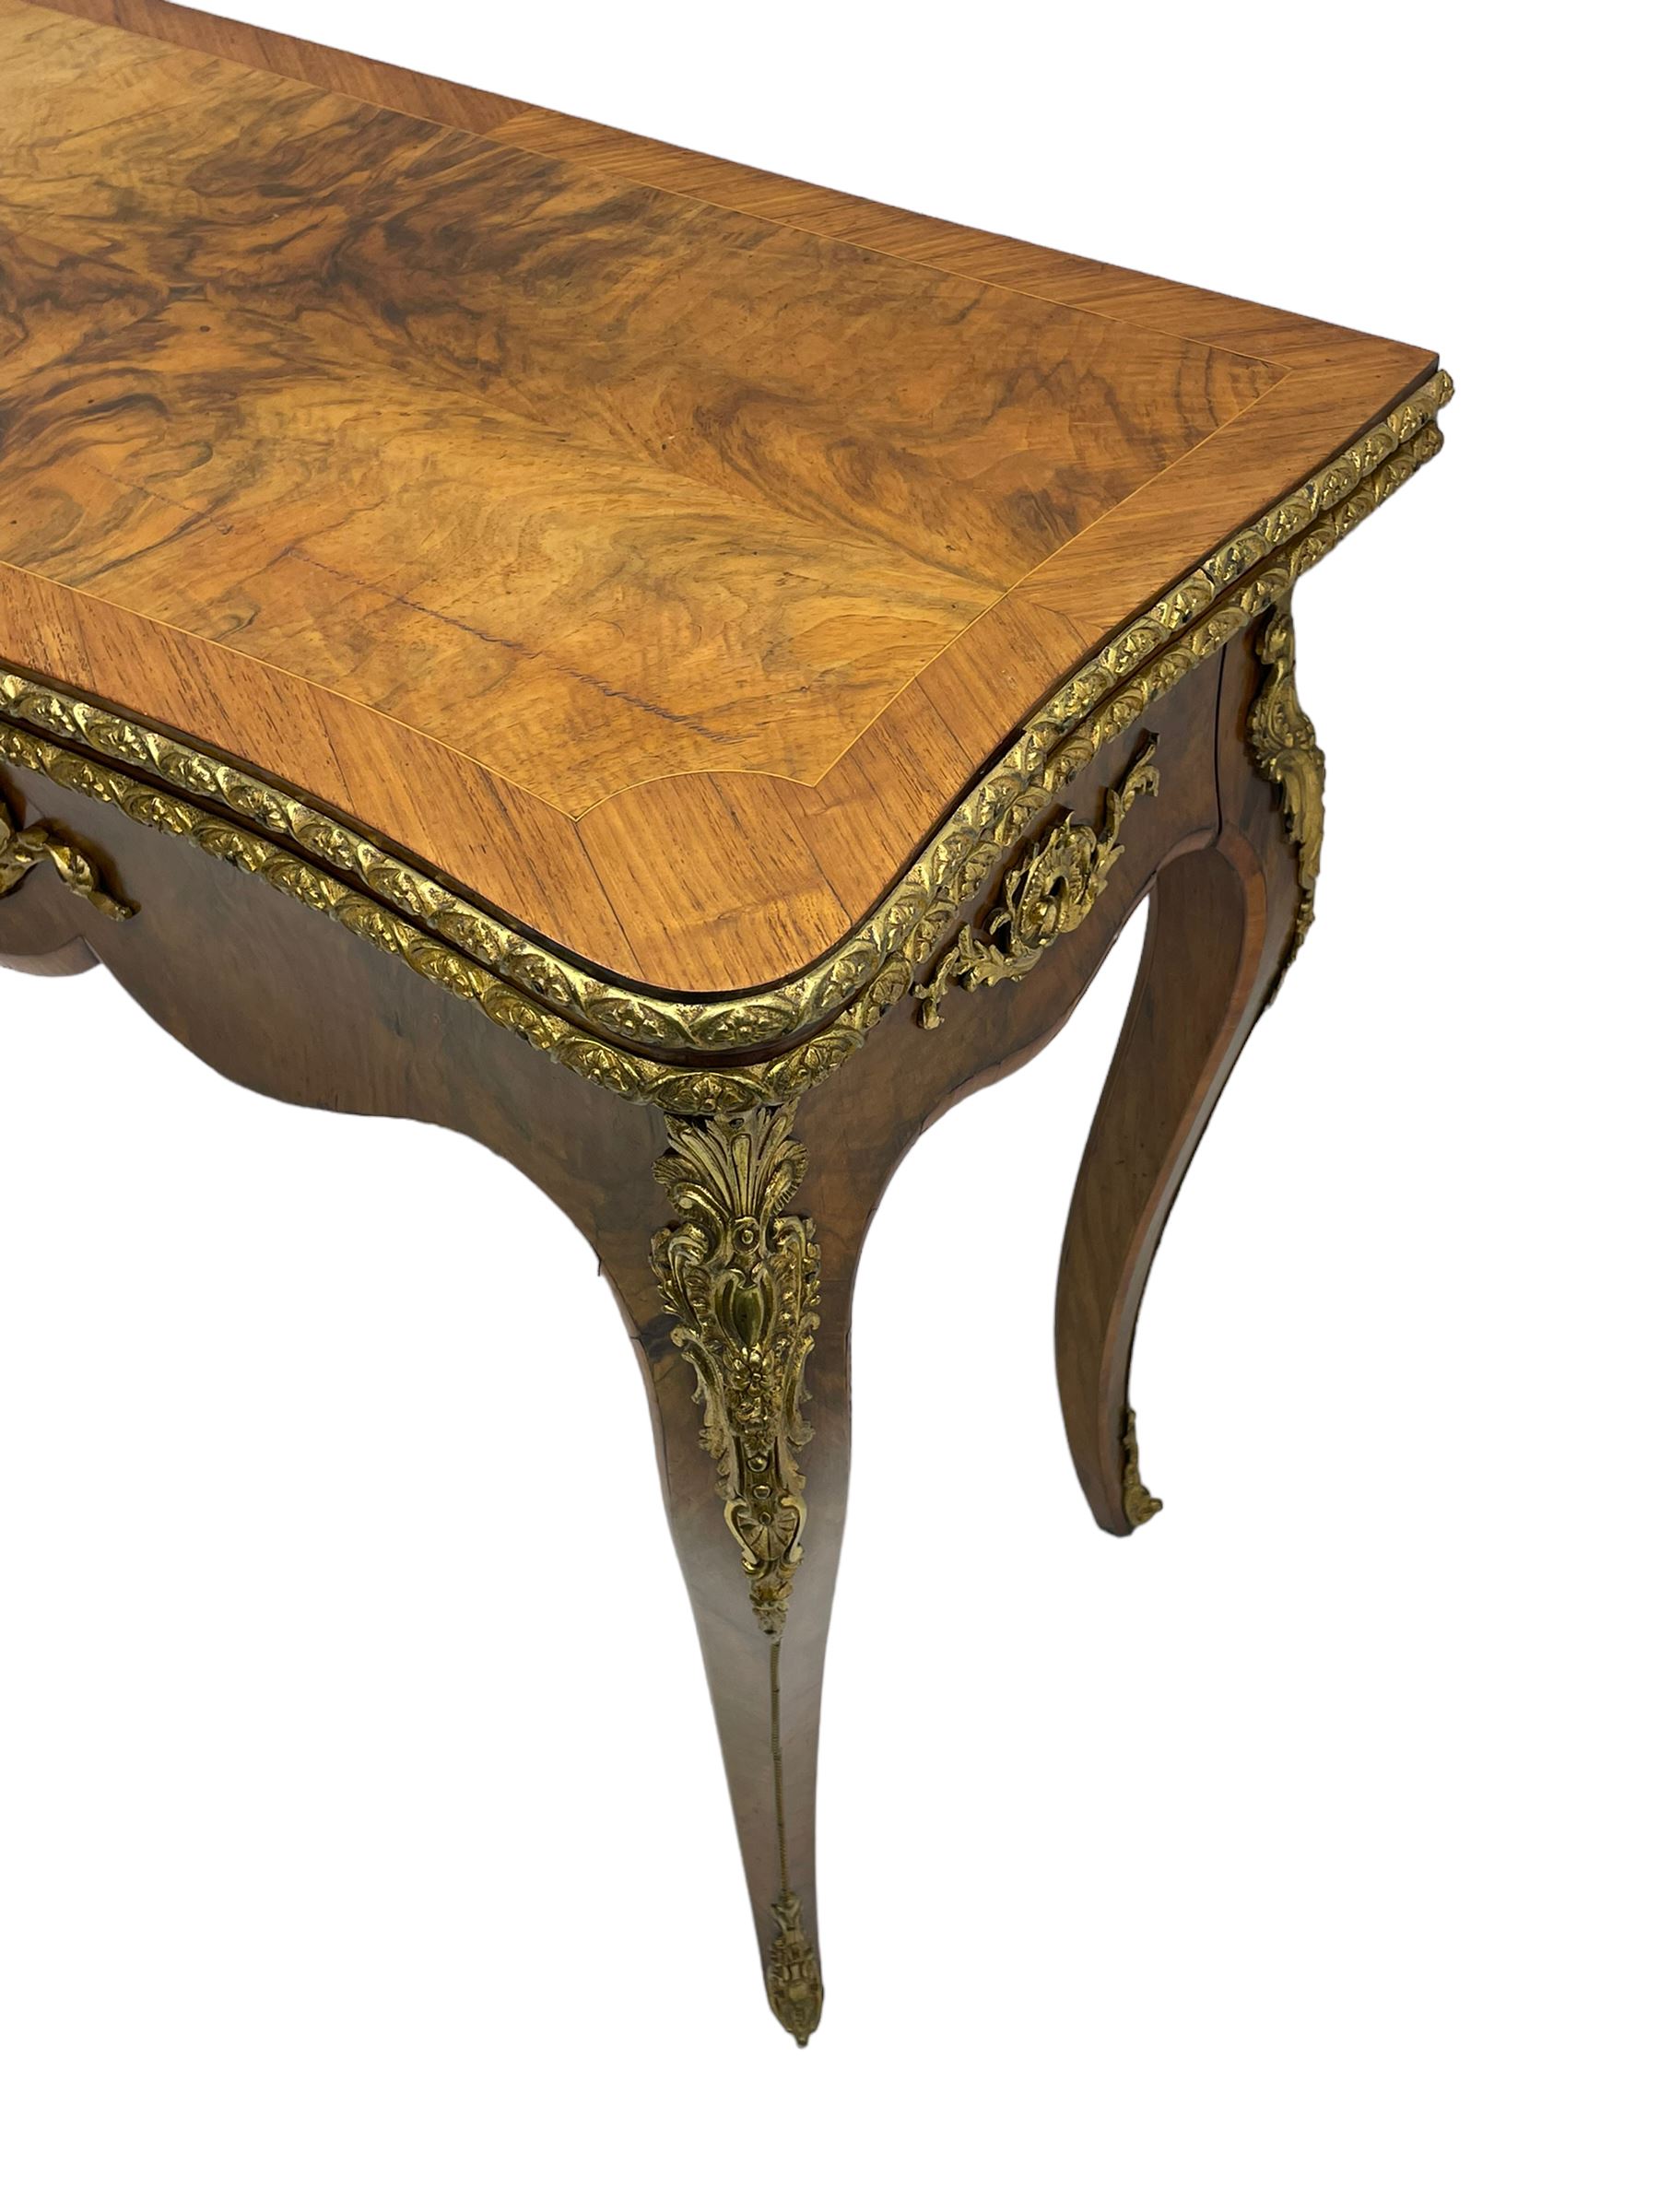 20th century French walnut and Kingwood card table - Image 5 of 15